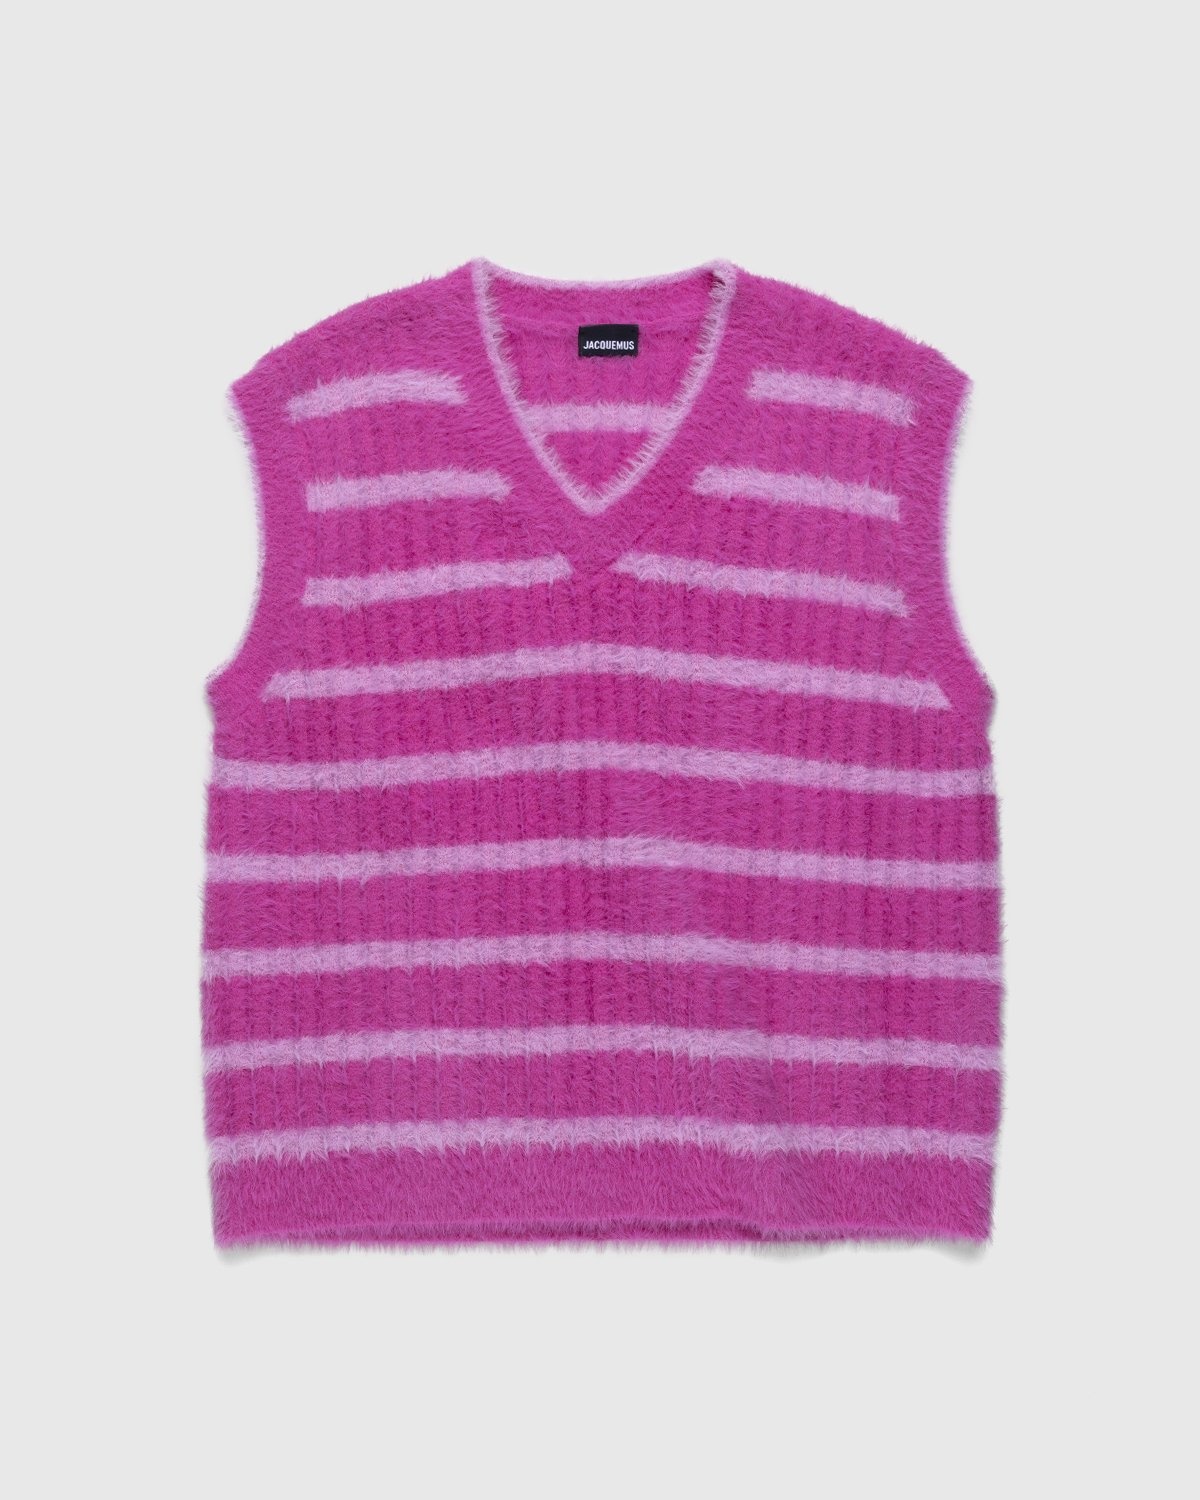 JACQUEMUS – Le Gilet Neve Multi-Pink - Knitwear - Pink - Image 1